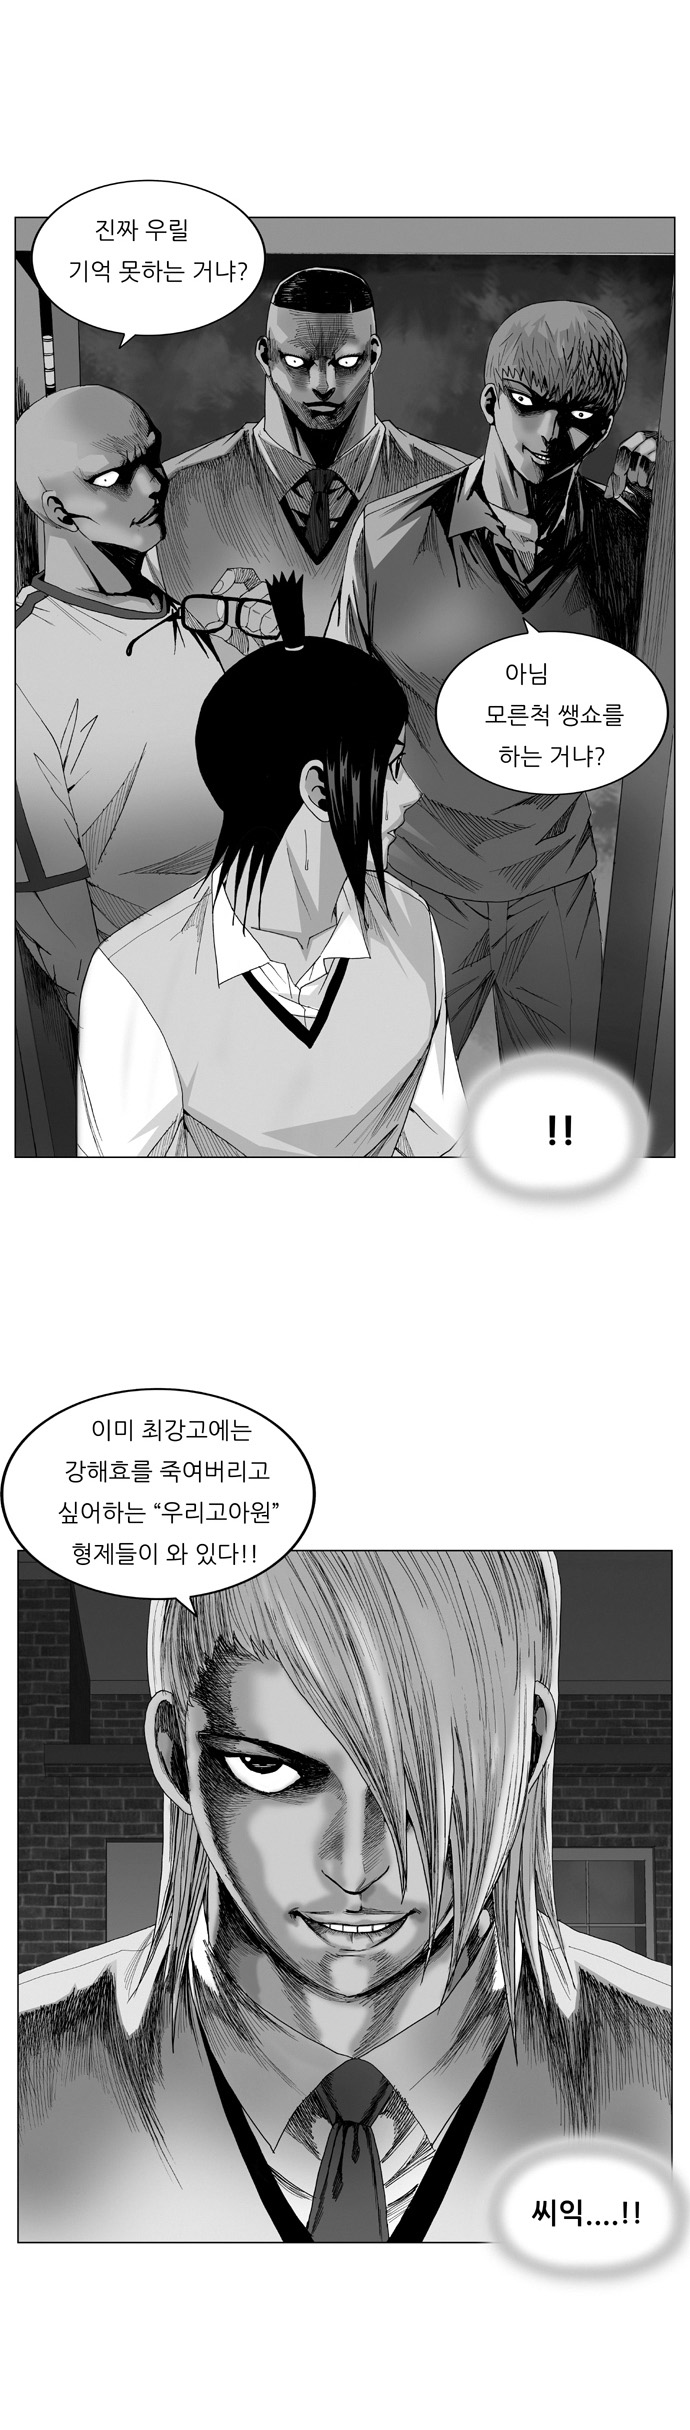 Ultimate Legend - Kang Hae Hyo - Chapter 50 - Page 1